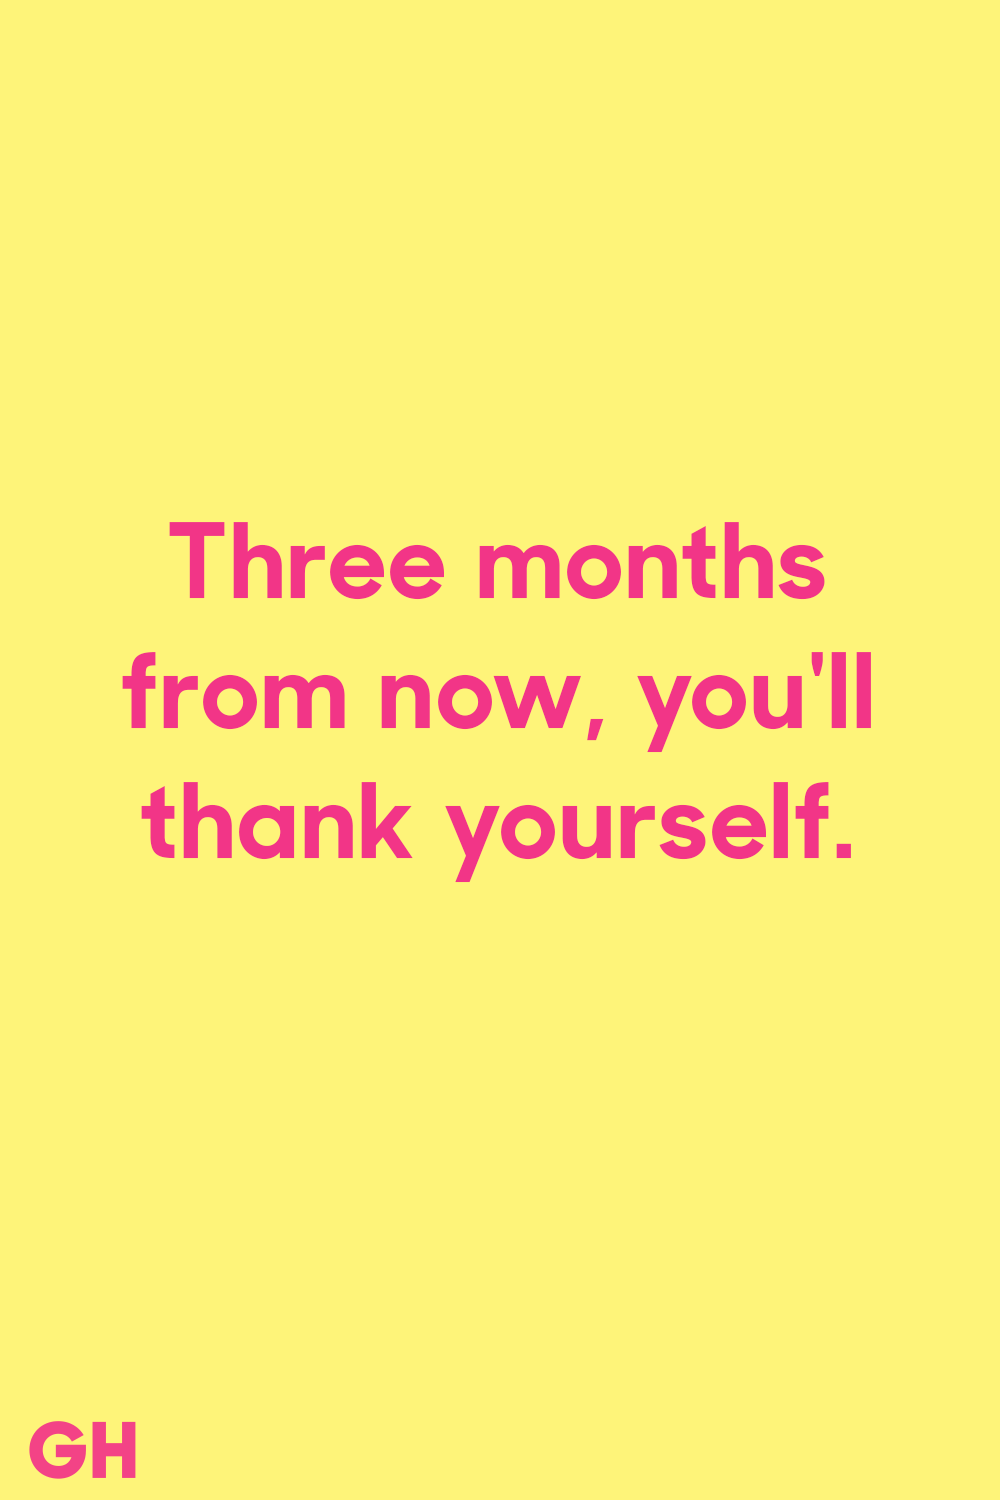 three months from now, you’ll thank yourself